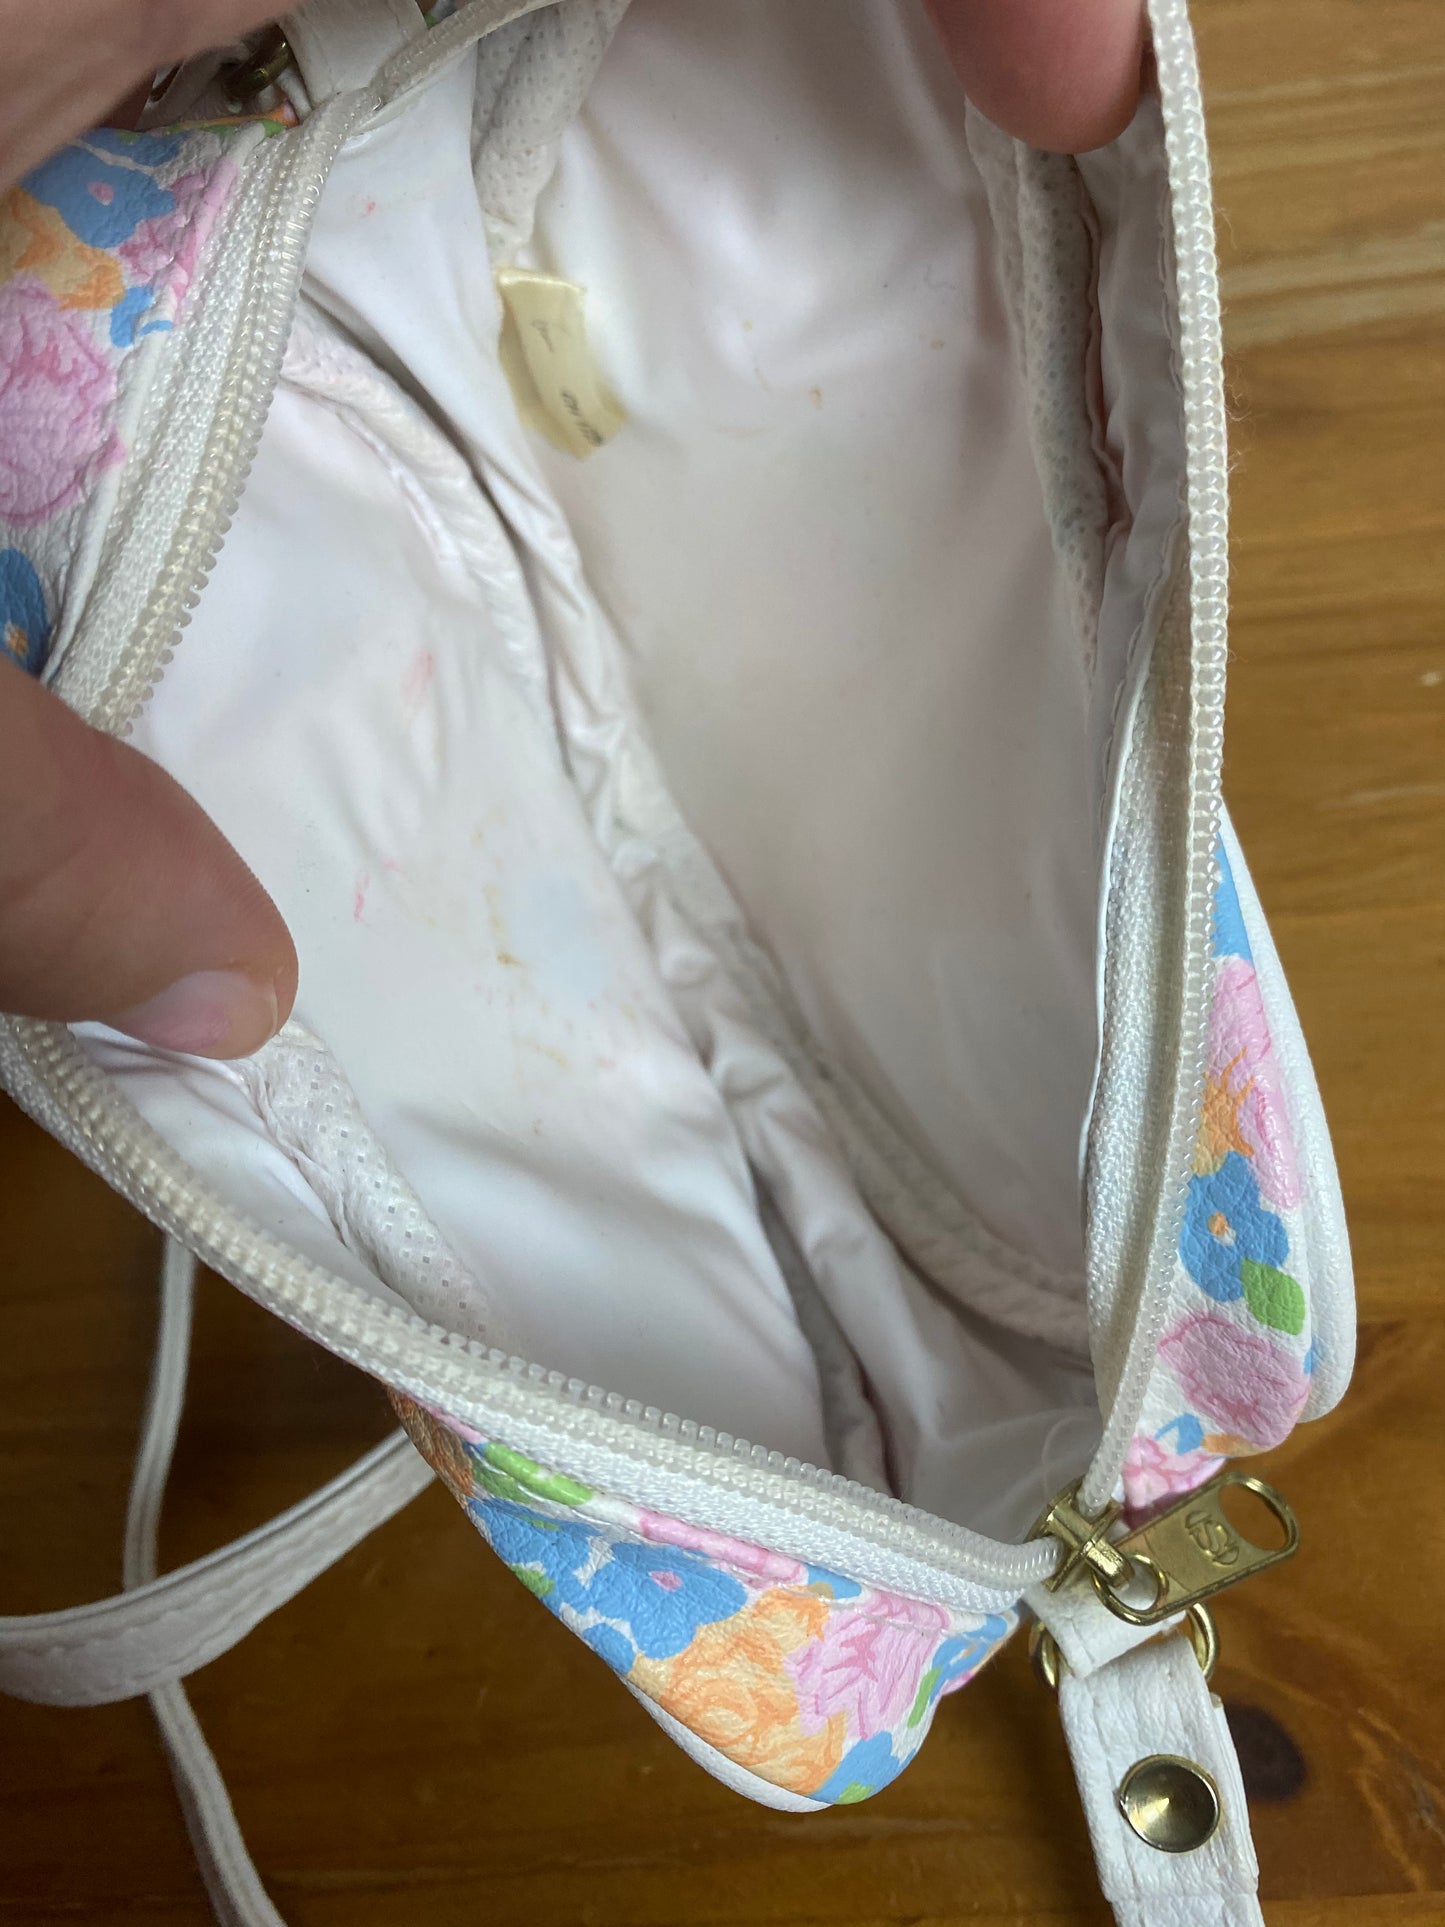 Tiny Floral Purse with Matching Mirror